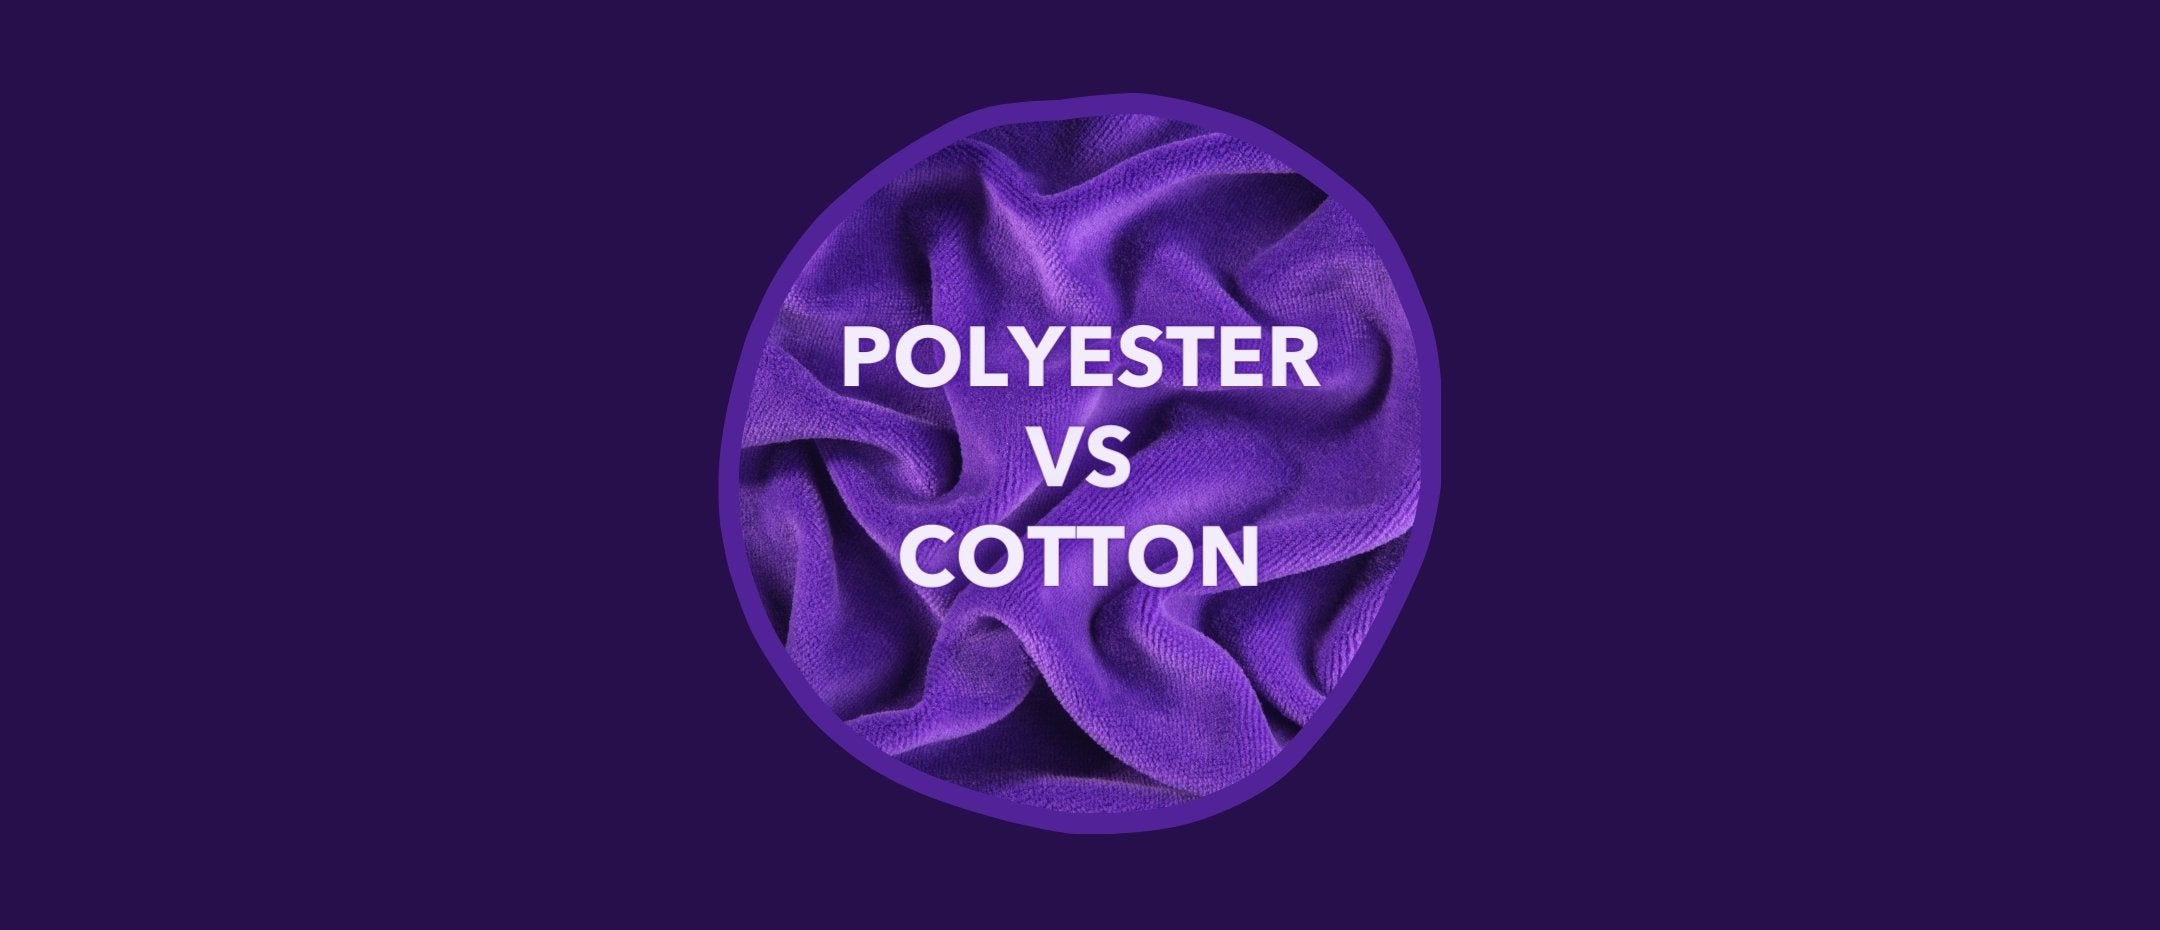 Polyester vs cotton sheets: what’s best? | Polysleep